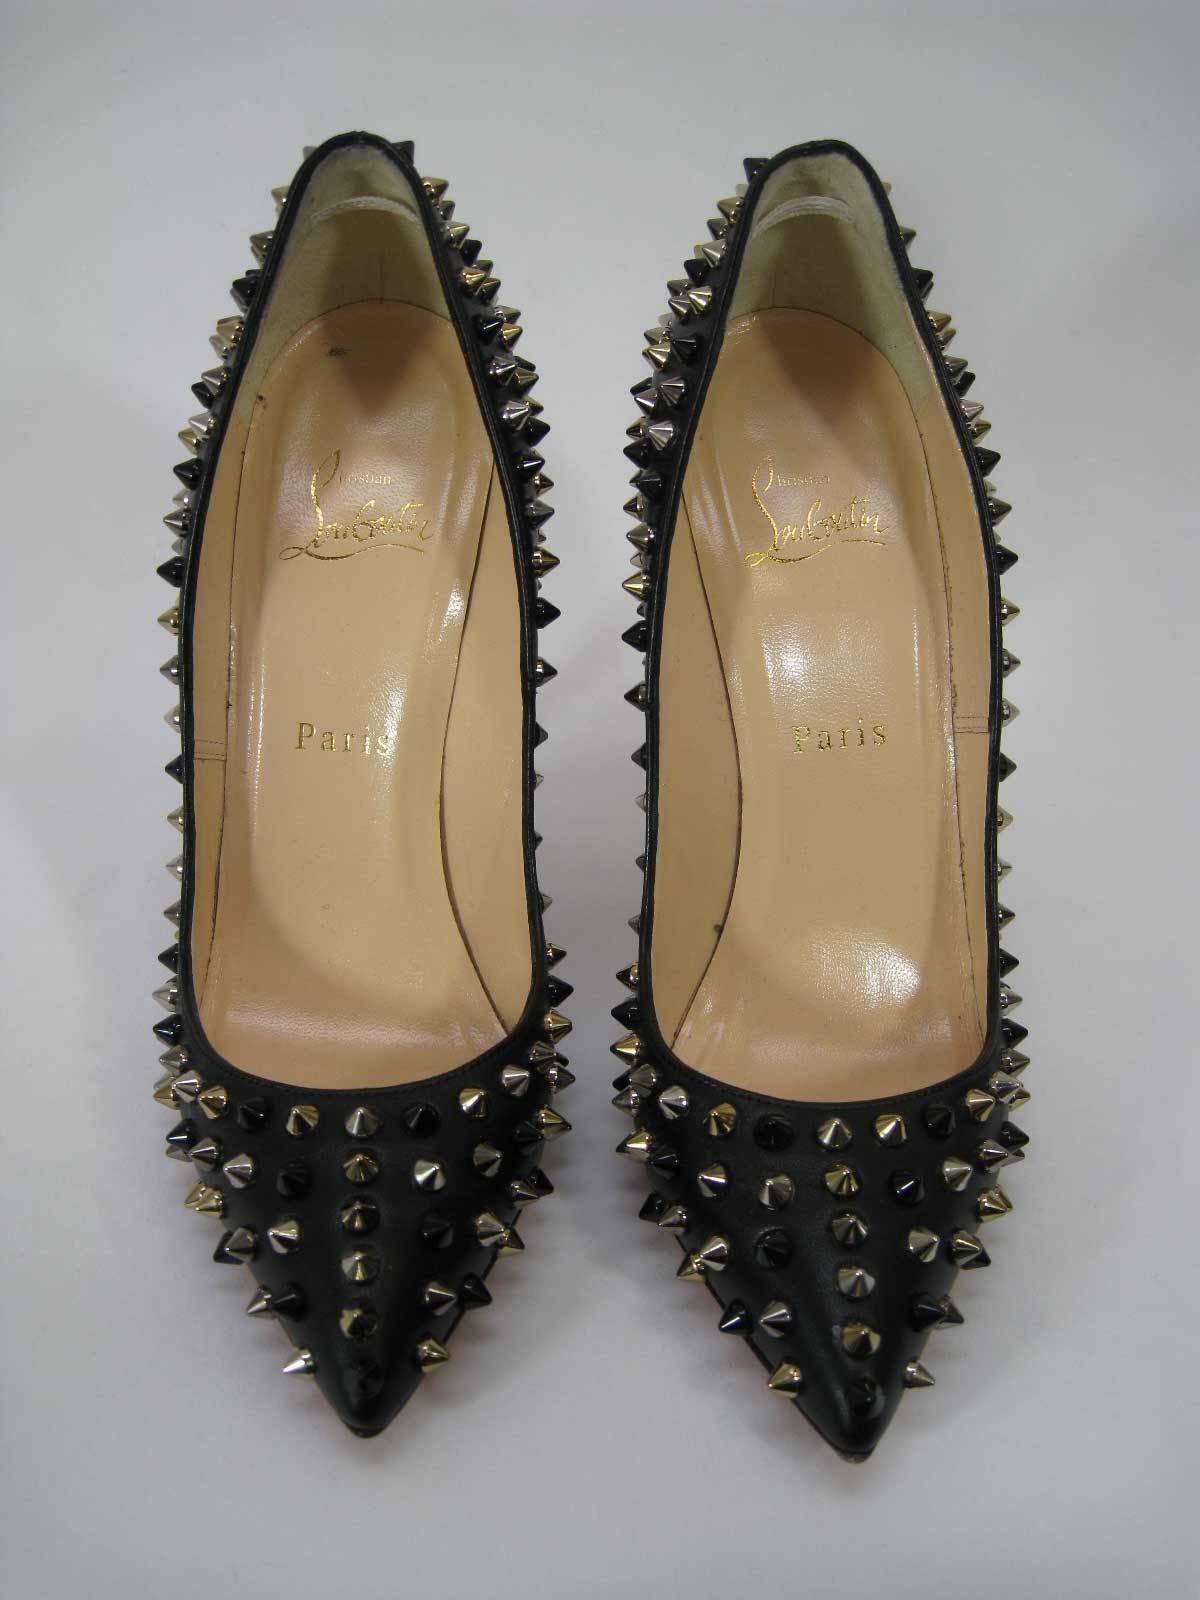 Iconic Louboutin studded high heels.

Style is Pigalle Spikes.

In original box with extra heel caps & spikes included.

Marked size 37.5.

Heel is 5